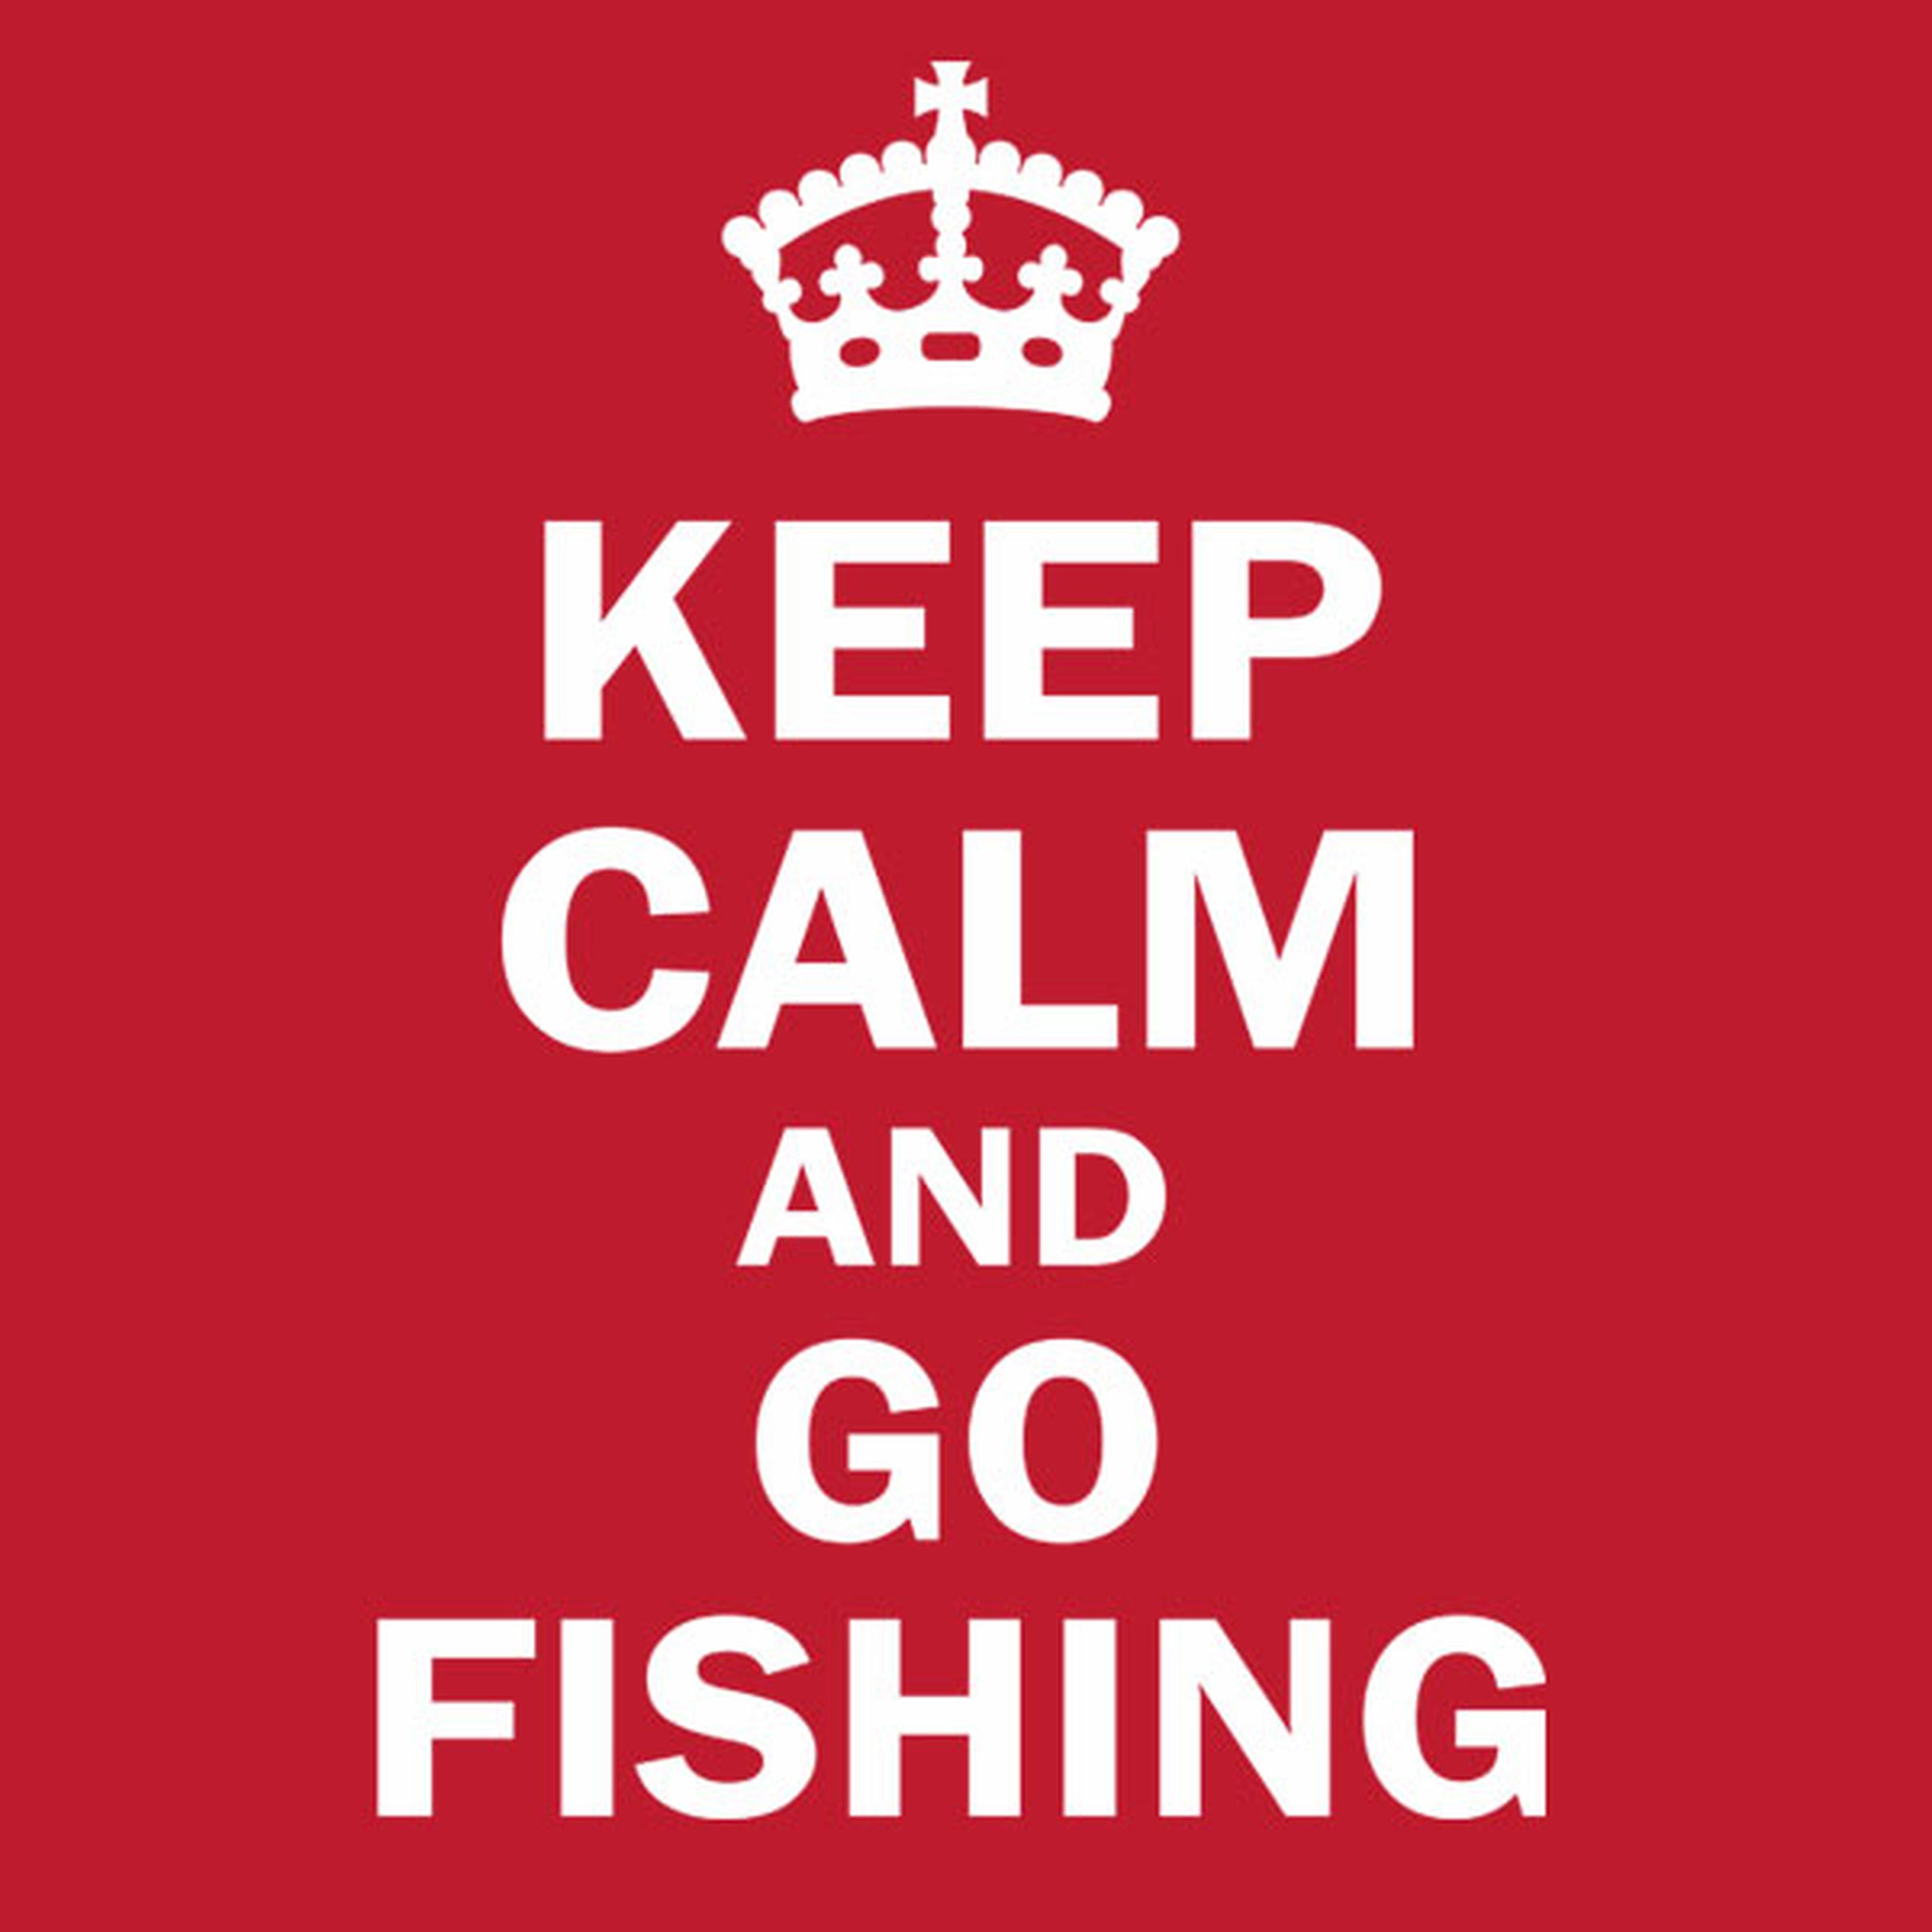 Keep calm and go fishing - T-shirt